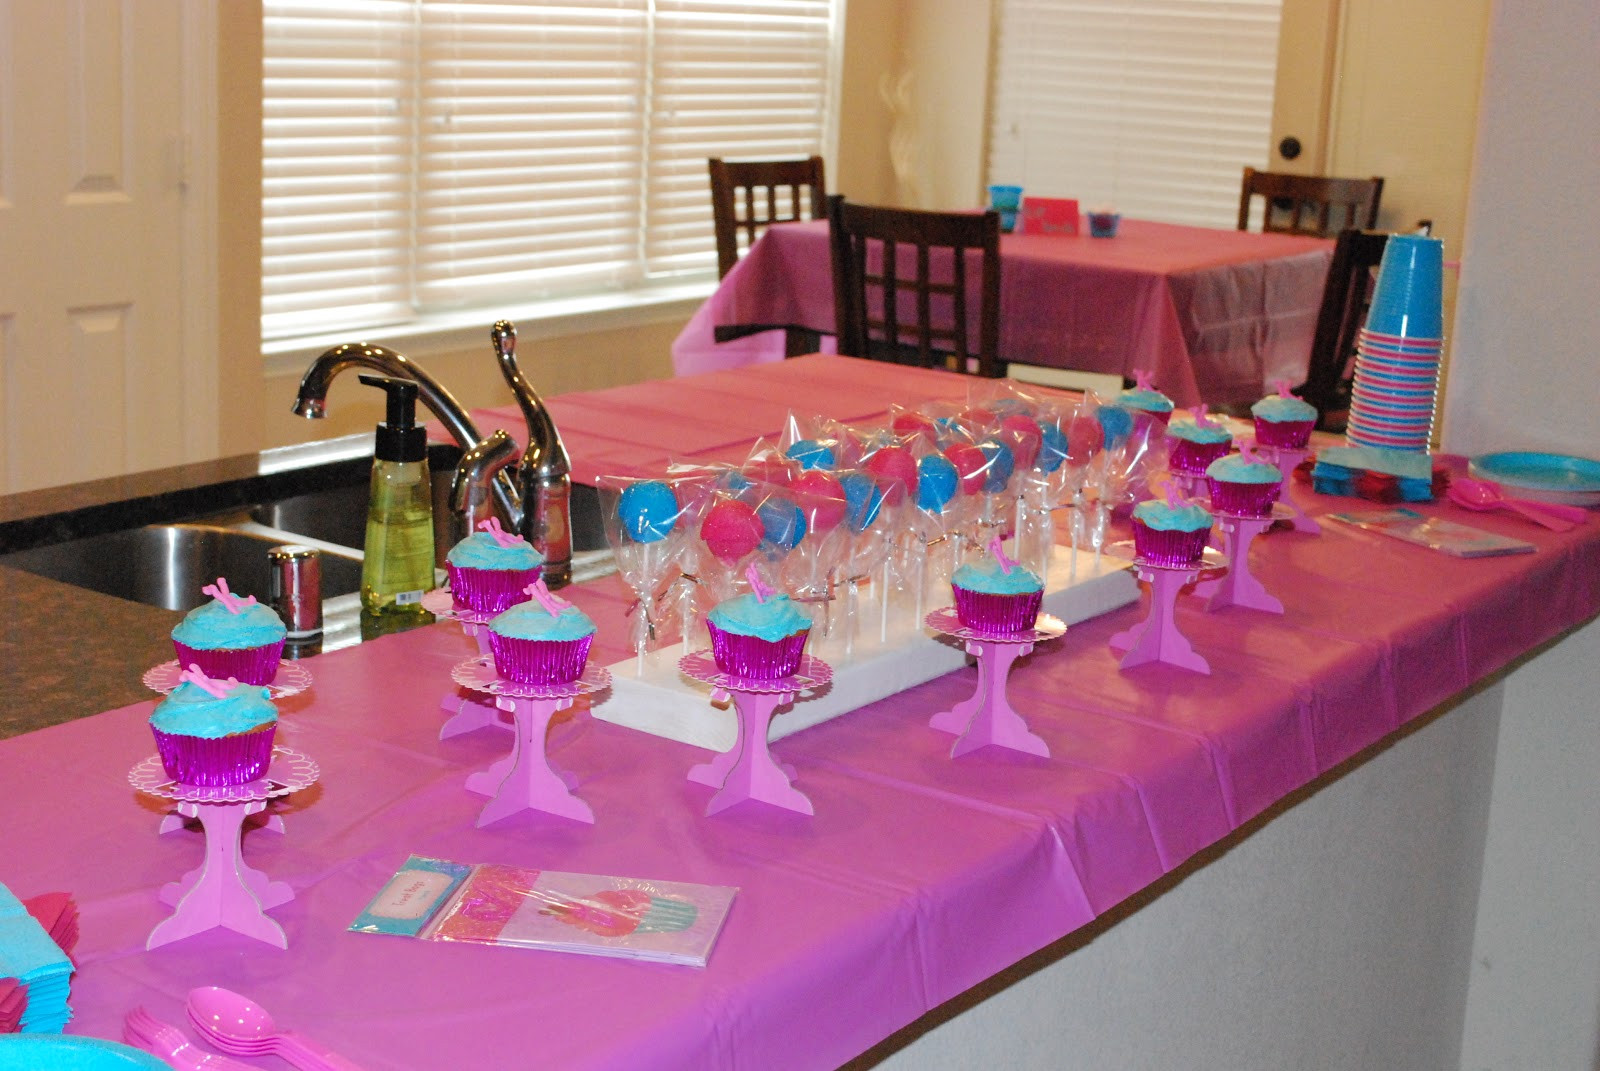 Birthday Party Ideas For 11 Yr Old Girl
 The Simple Life SPArty Birthday Party for my 11 Year Old